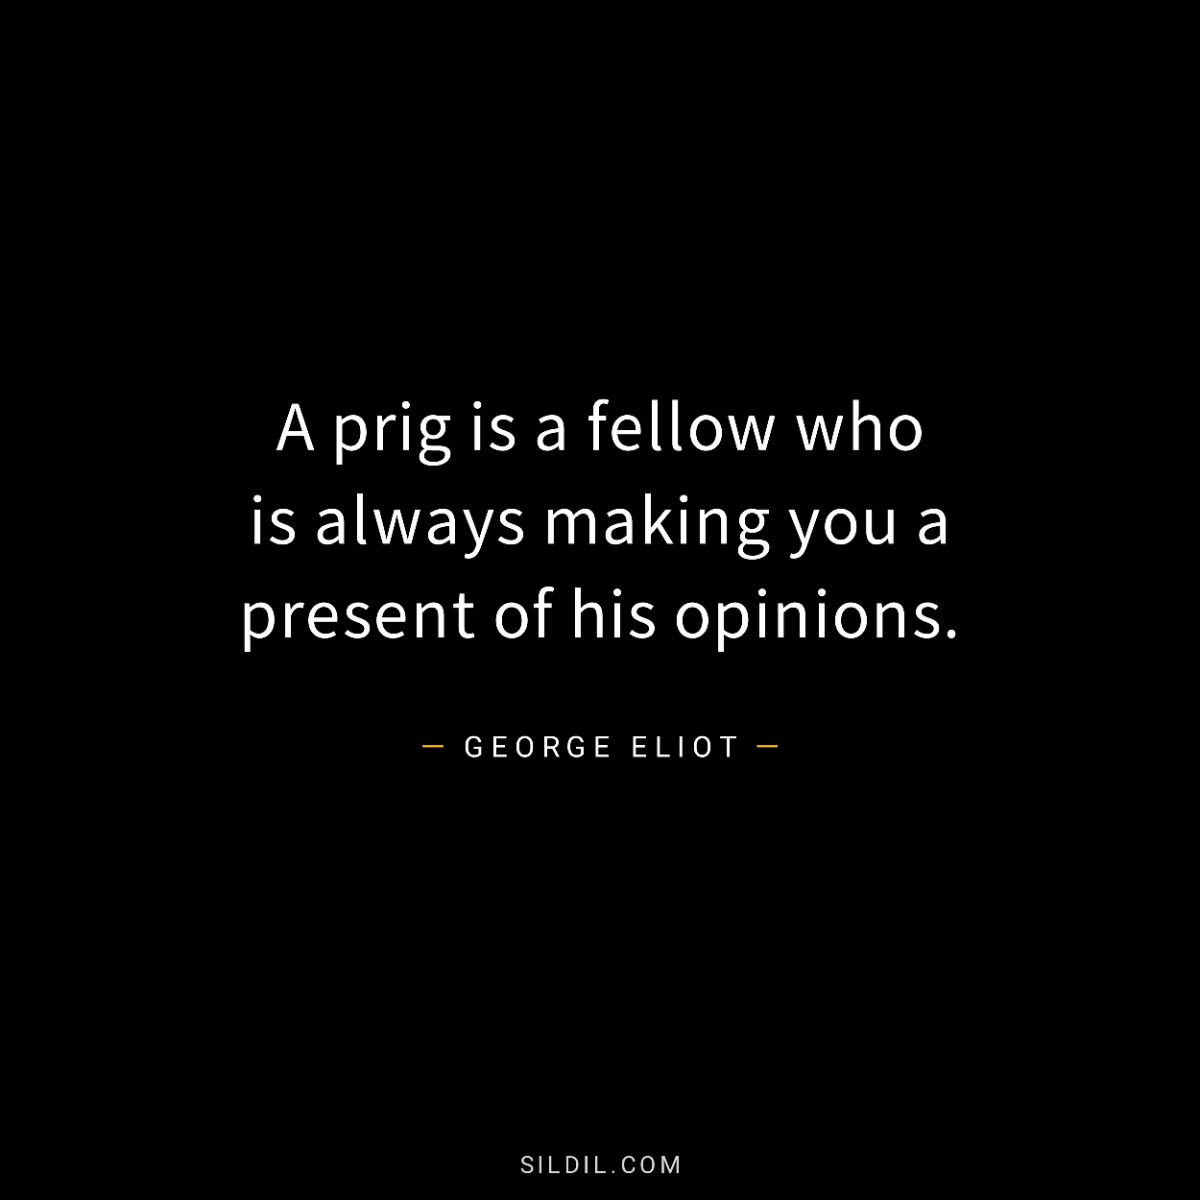 A prig is a fellow who is always making you a present of his opinions.